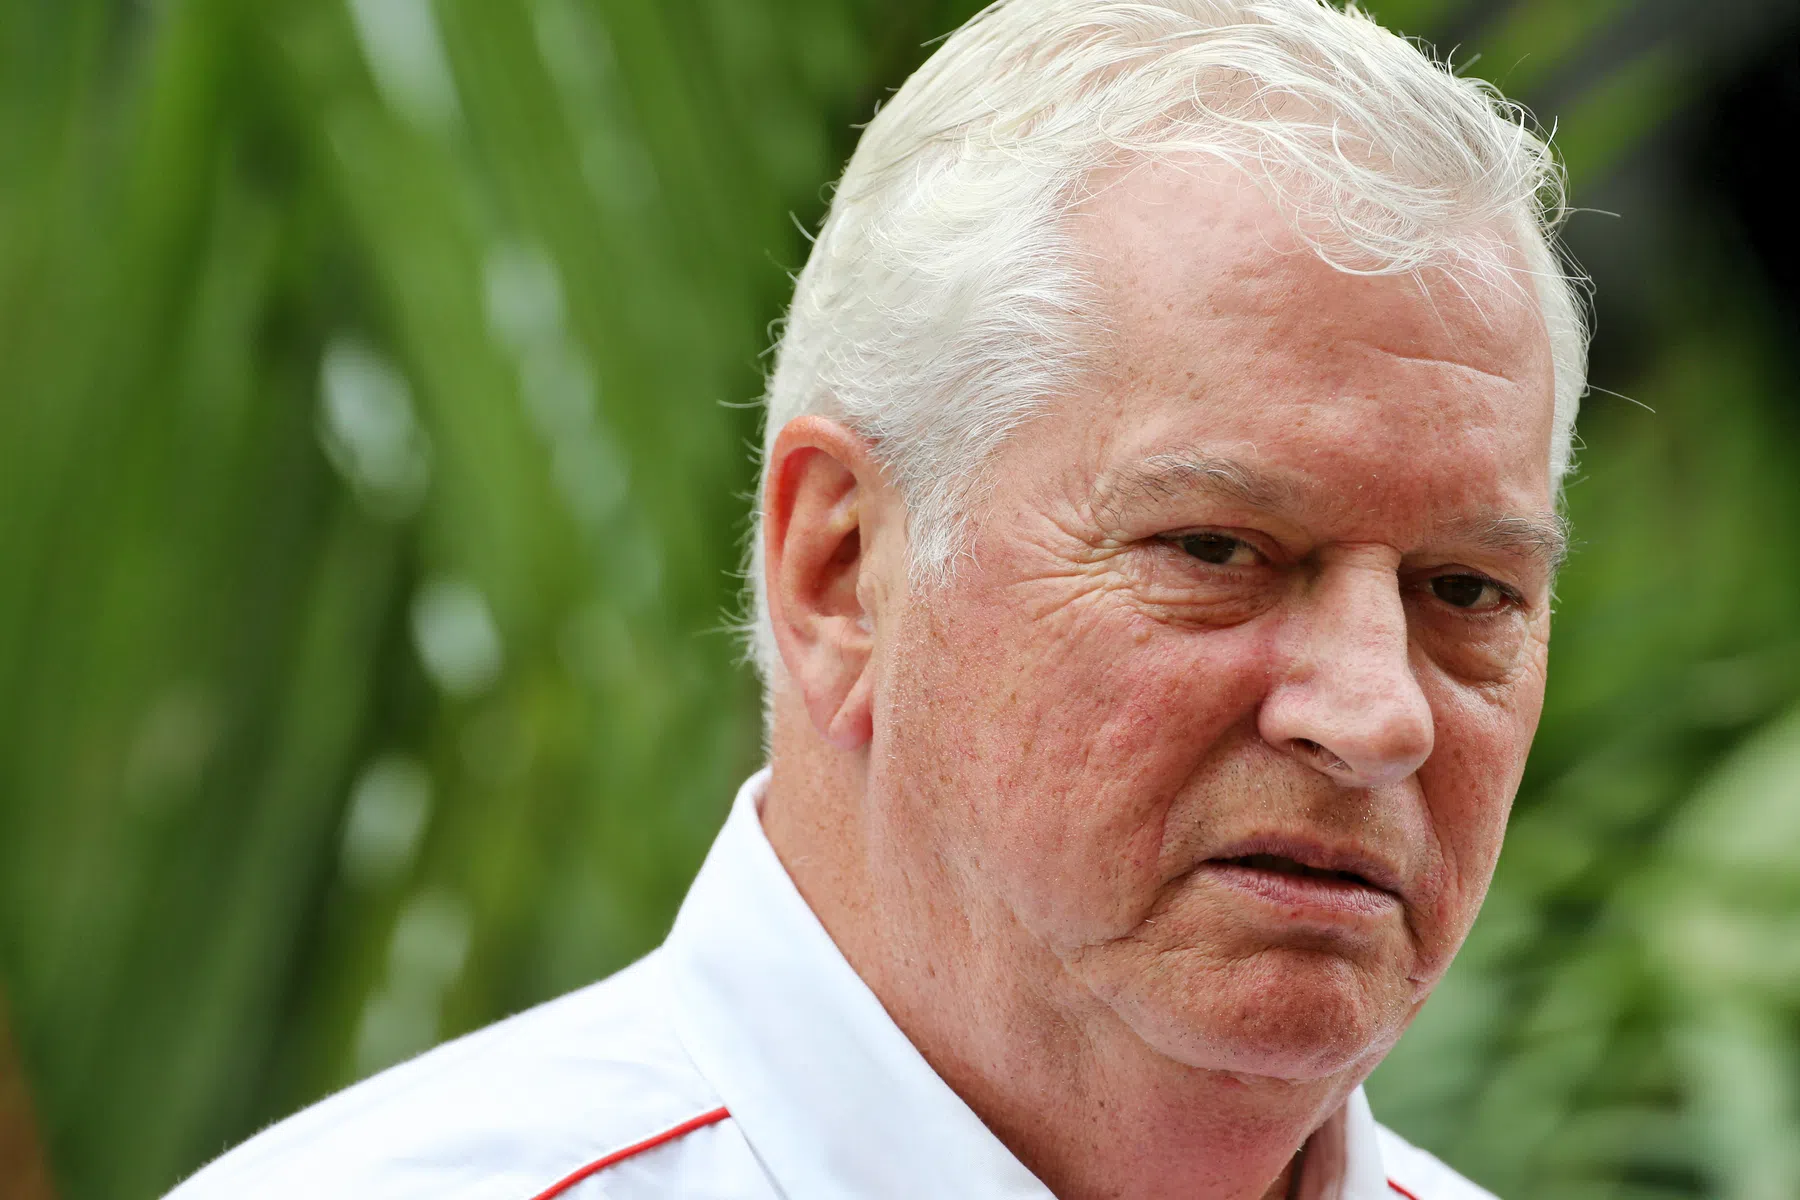 analysis andretti pat symonds brought in as consultant